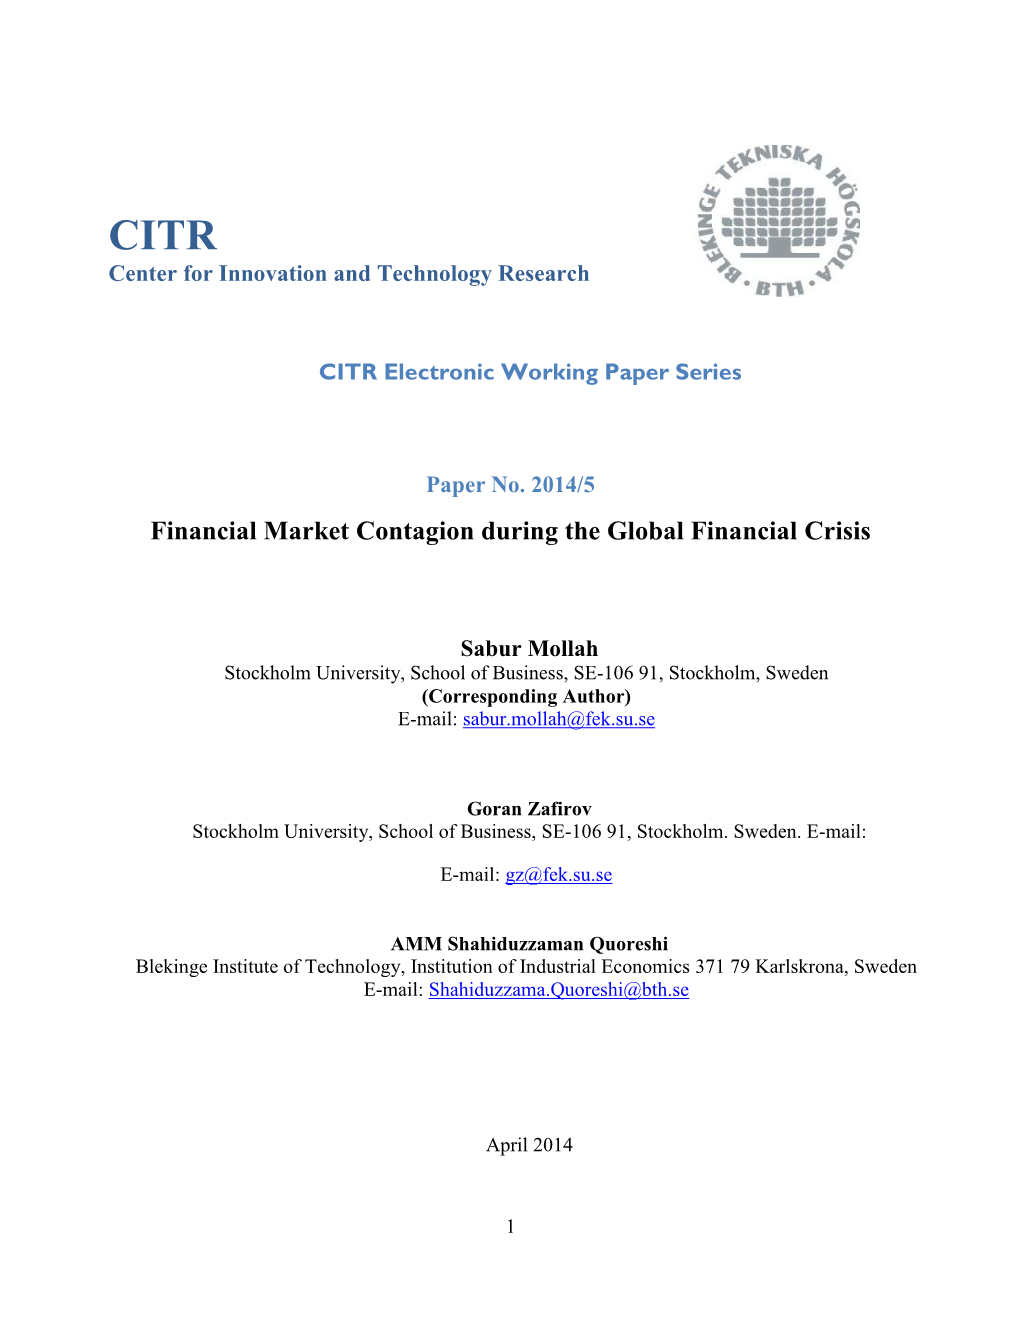 Financial Market Contagion During the Global Financial Crisis